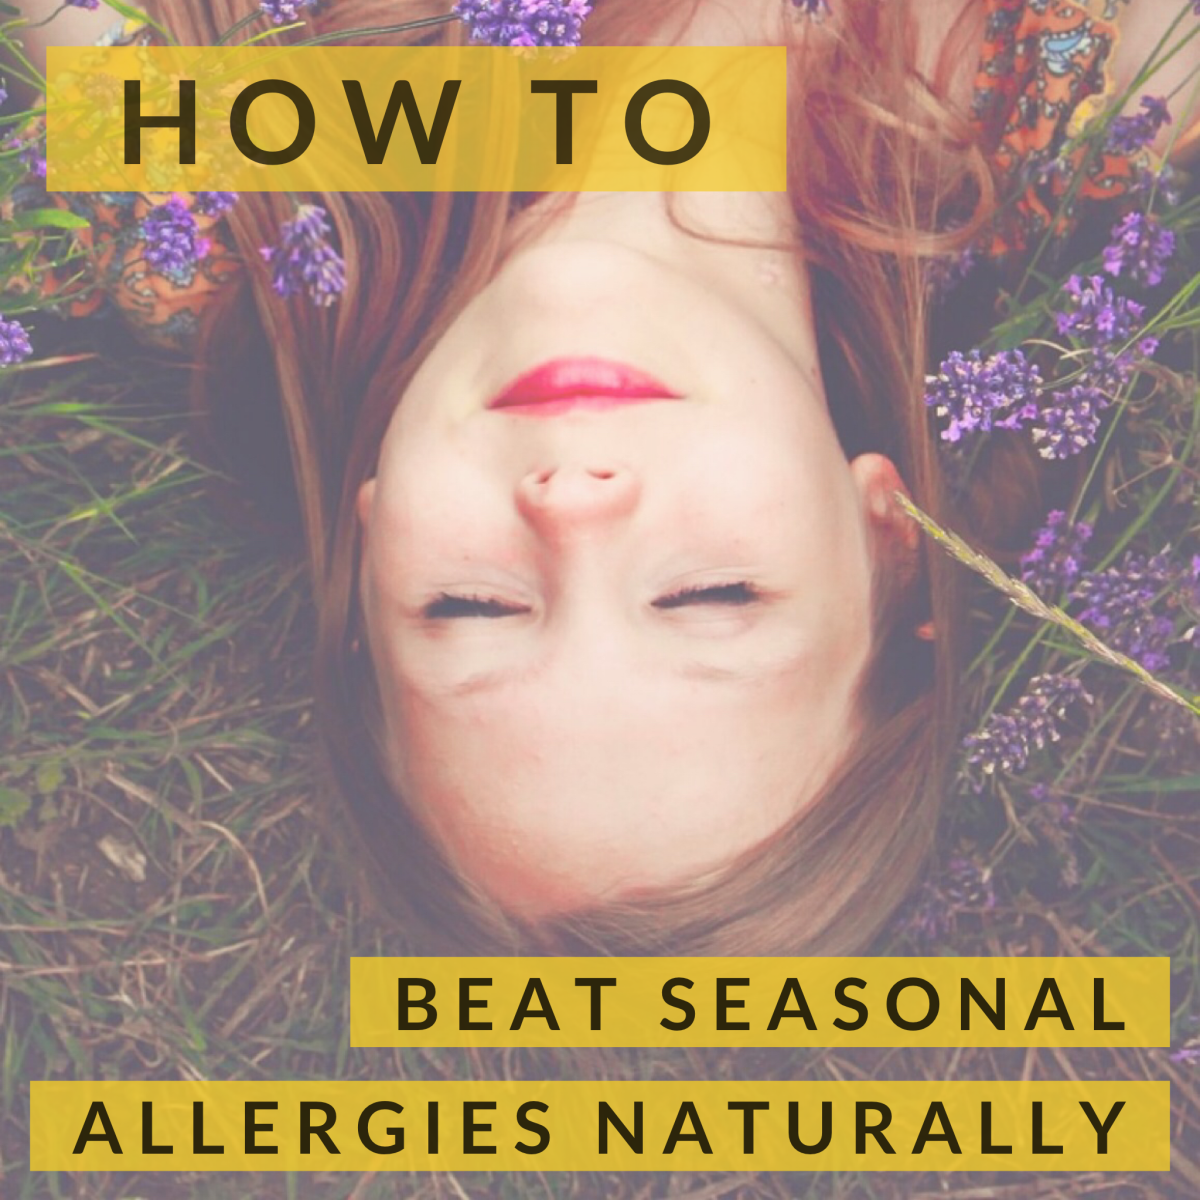 How to Beat Seasonal Allergies Naturally: Methods That Actually Work